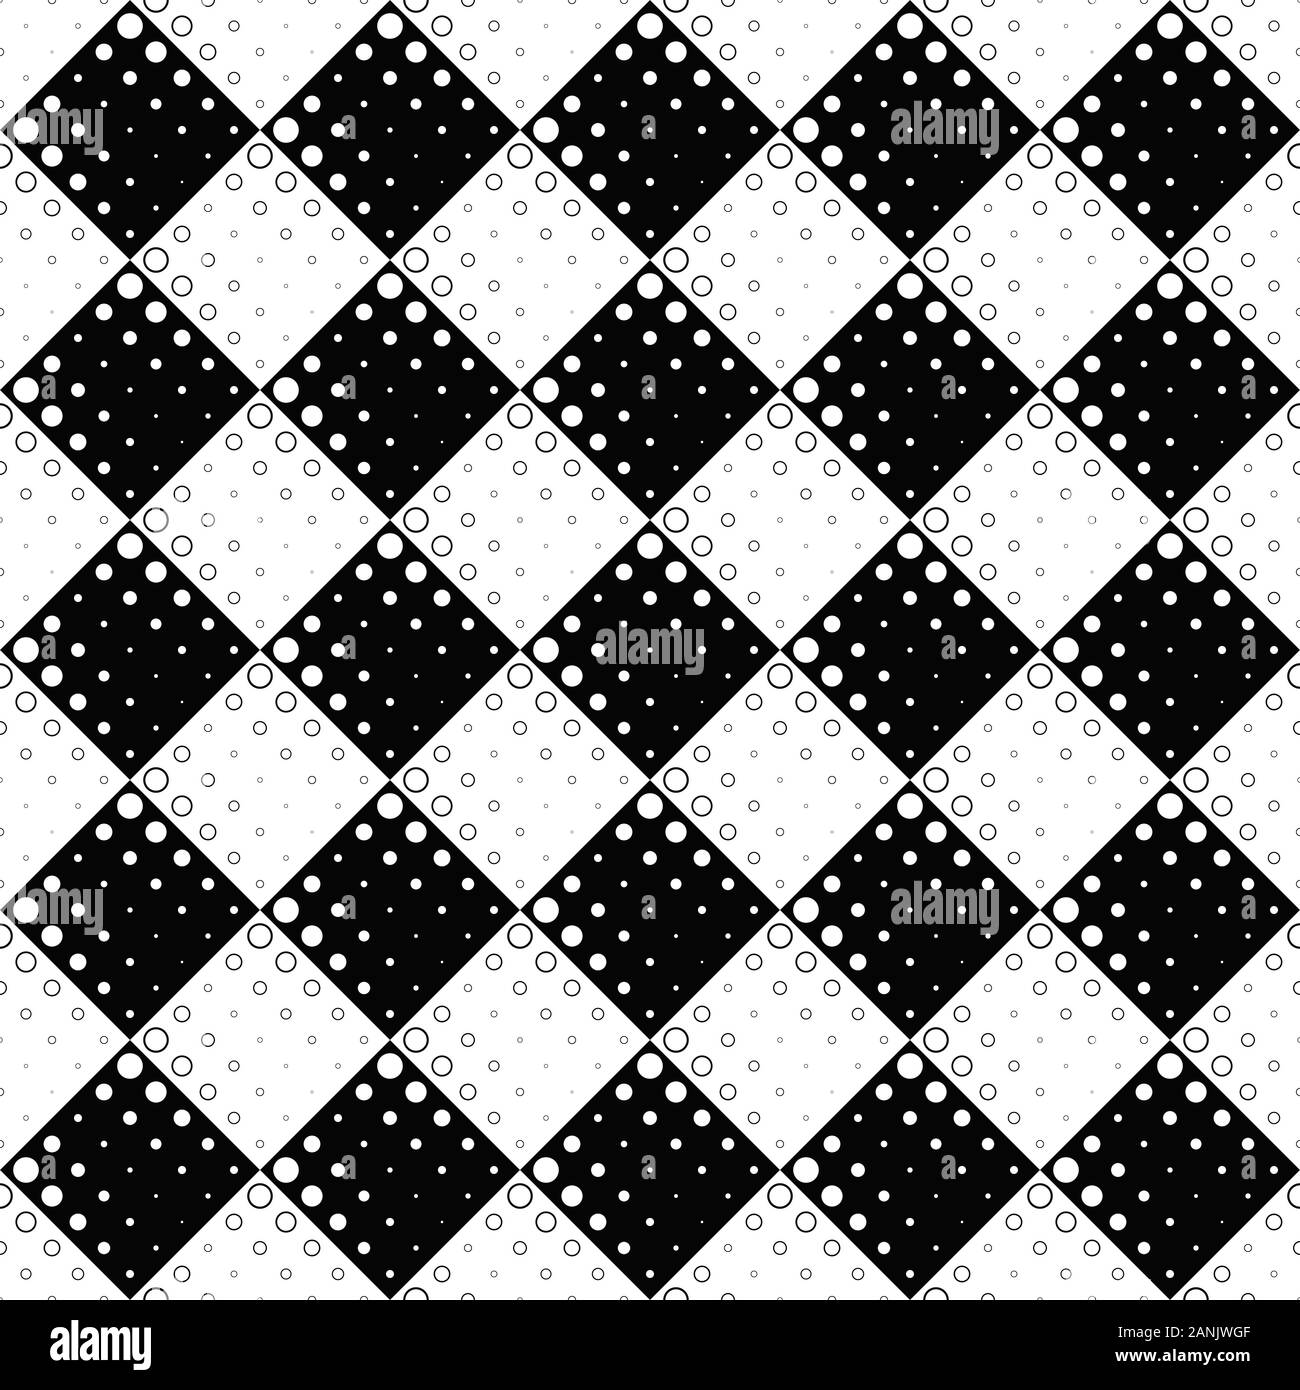 Black white seamless geometrical circle pattern background - monochrome abstract vector graphic design from dots and circles Stock Vector